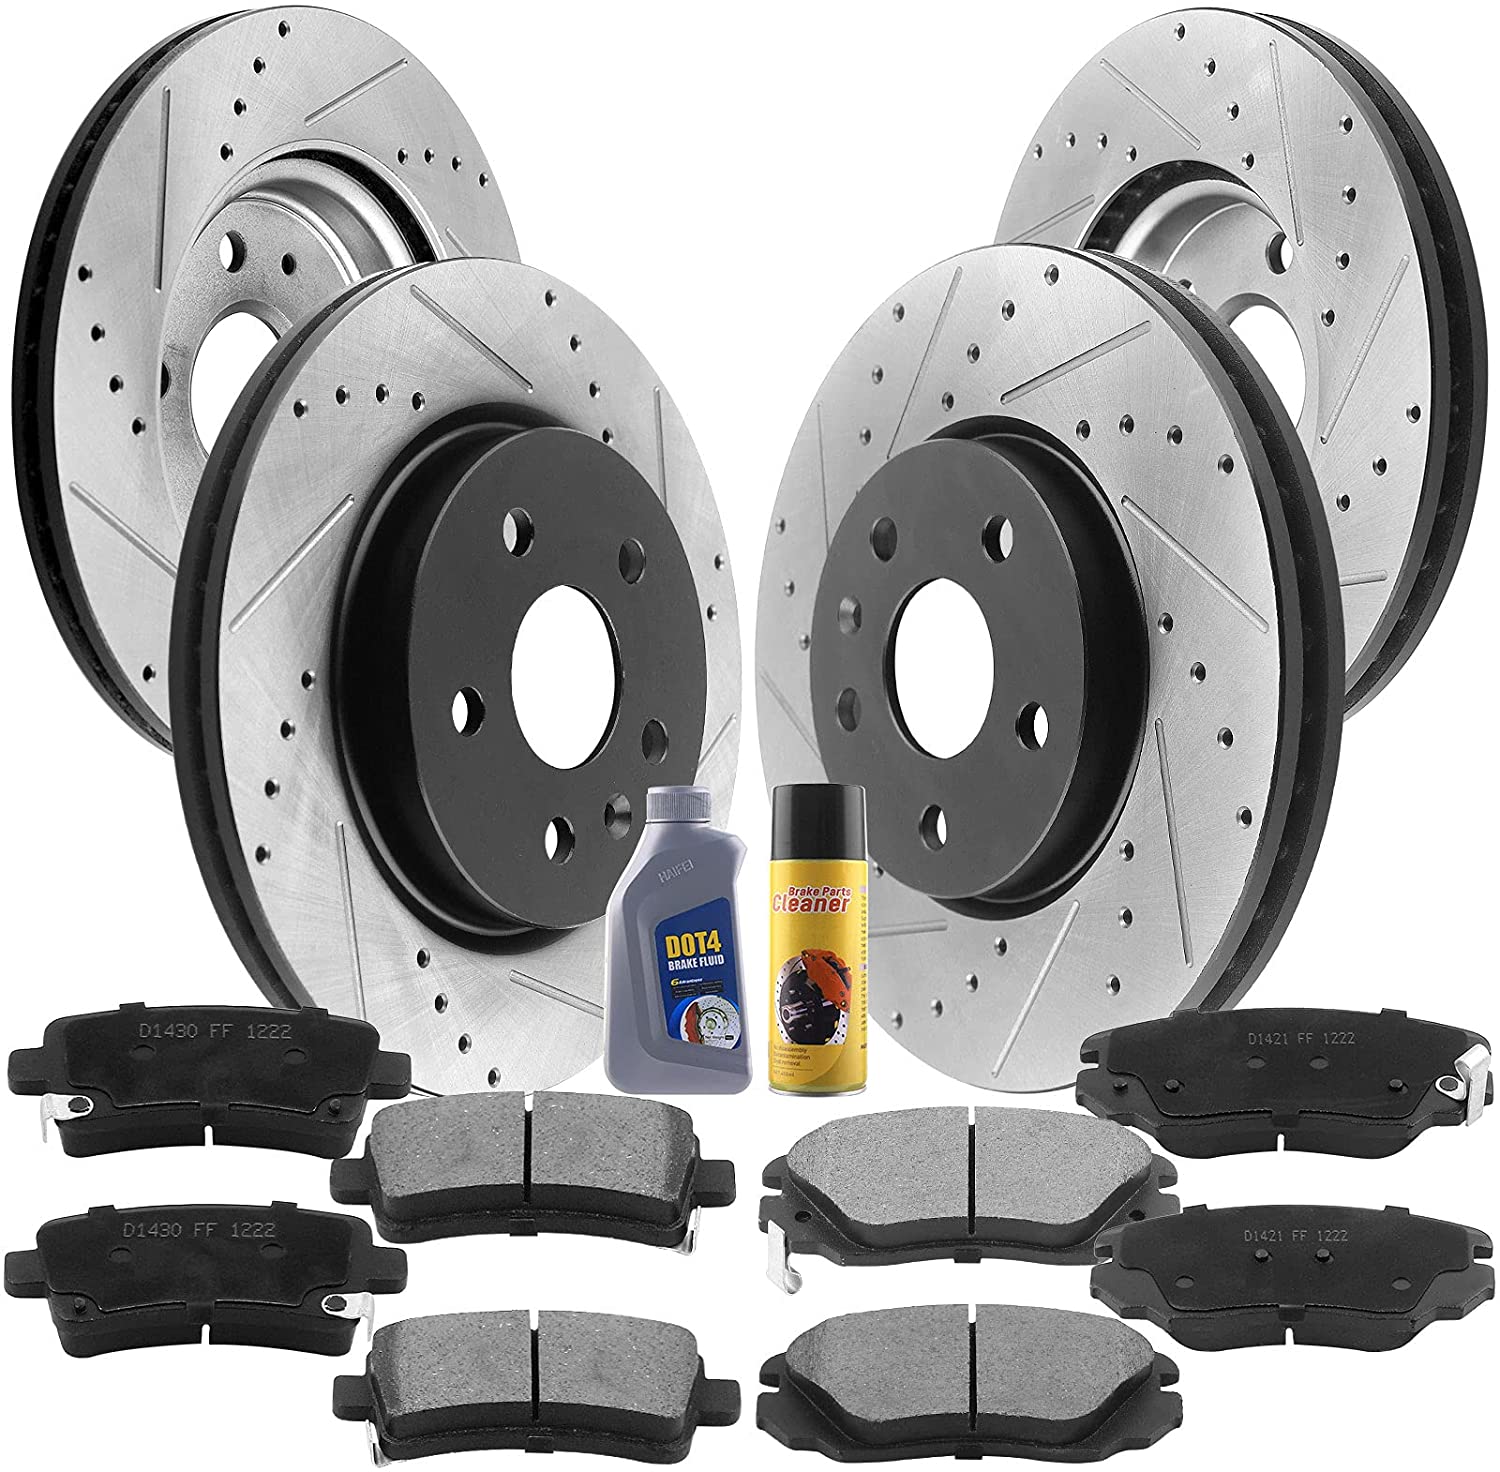 Front & Rear Drilled & Slotted Disc Brake Rotors + Ceramic Pads + Cleaner & Fluid Fits for 2010 2011 2012 2013 2014 2015 Chevy Camaro MotorbyMotor